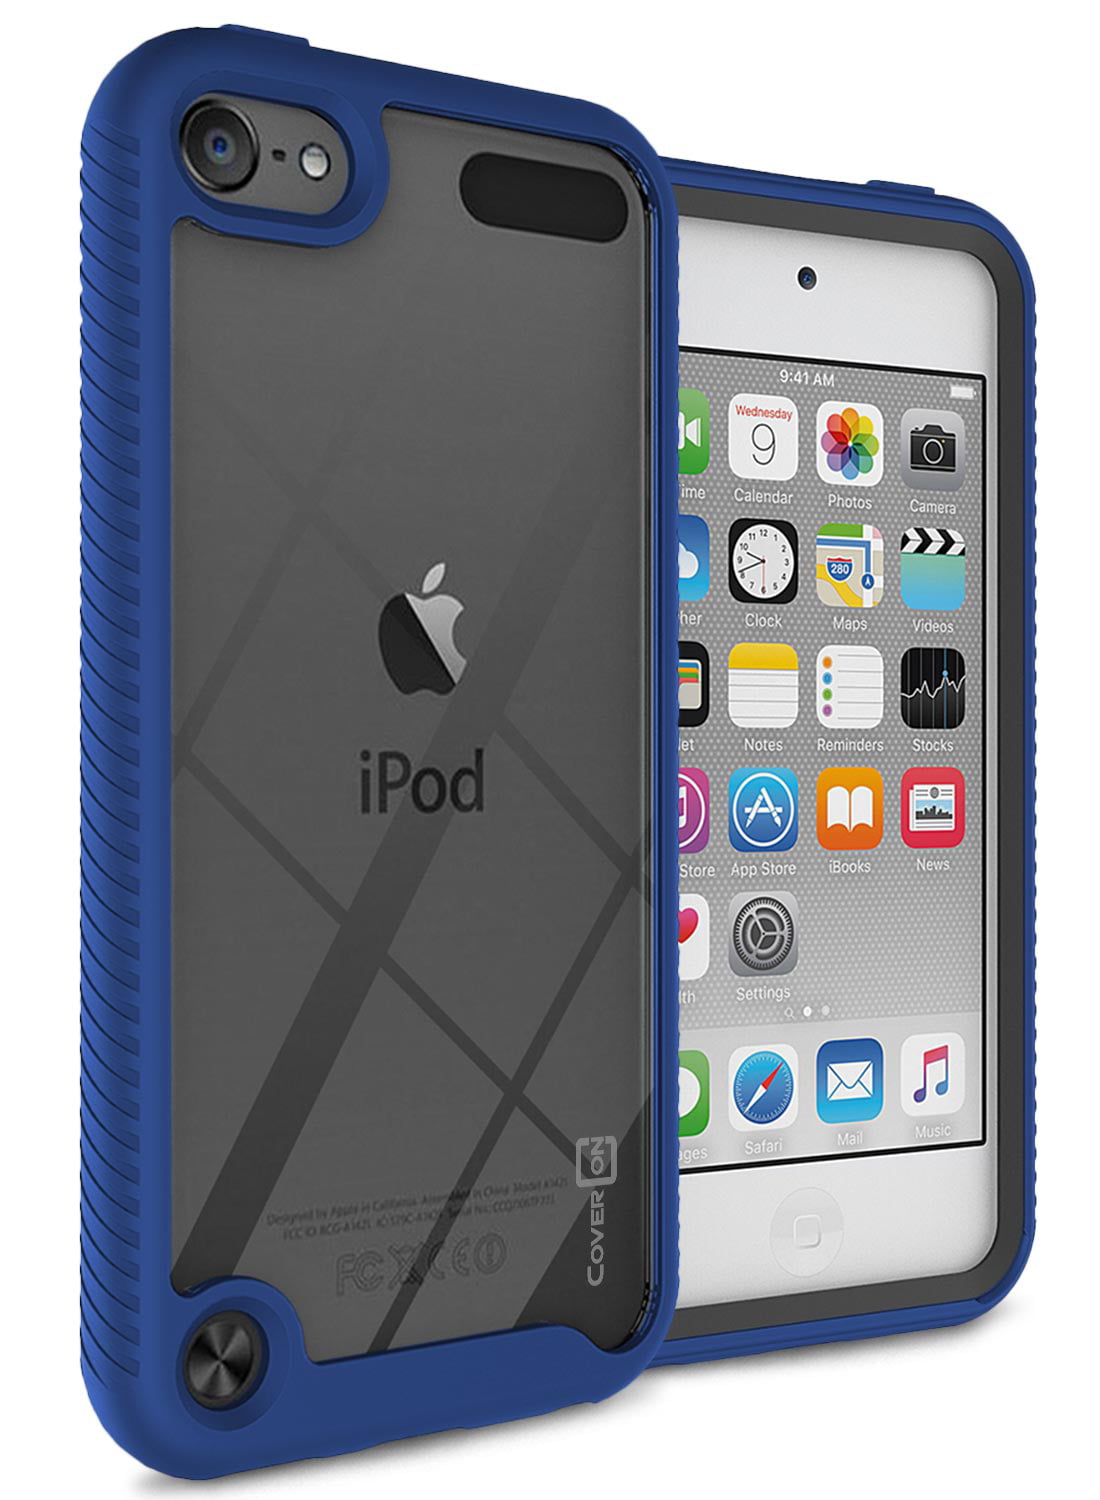 Jiunai iPod Touch 7 7th Generation Case iPod Touch Case Heavy Duty Shockproof Dual Layer Slim Anti Scratch Protective Bumper Matte Rugged Rubber Cover Case for iPod Touch 7th 6th 5th Generation Blue 